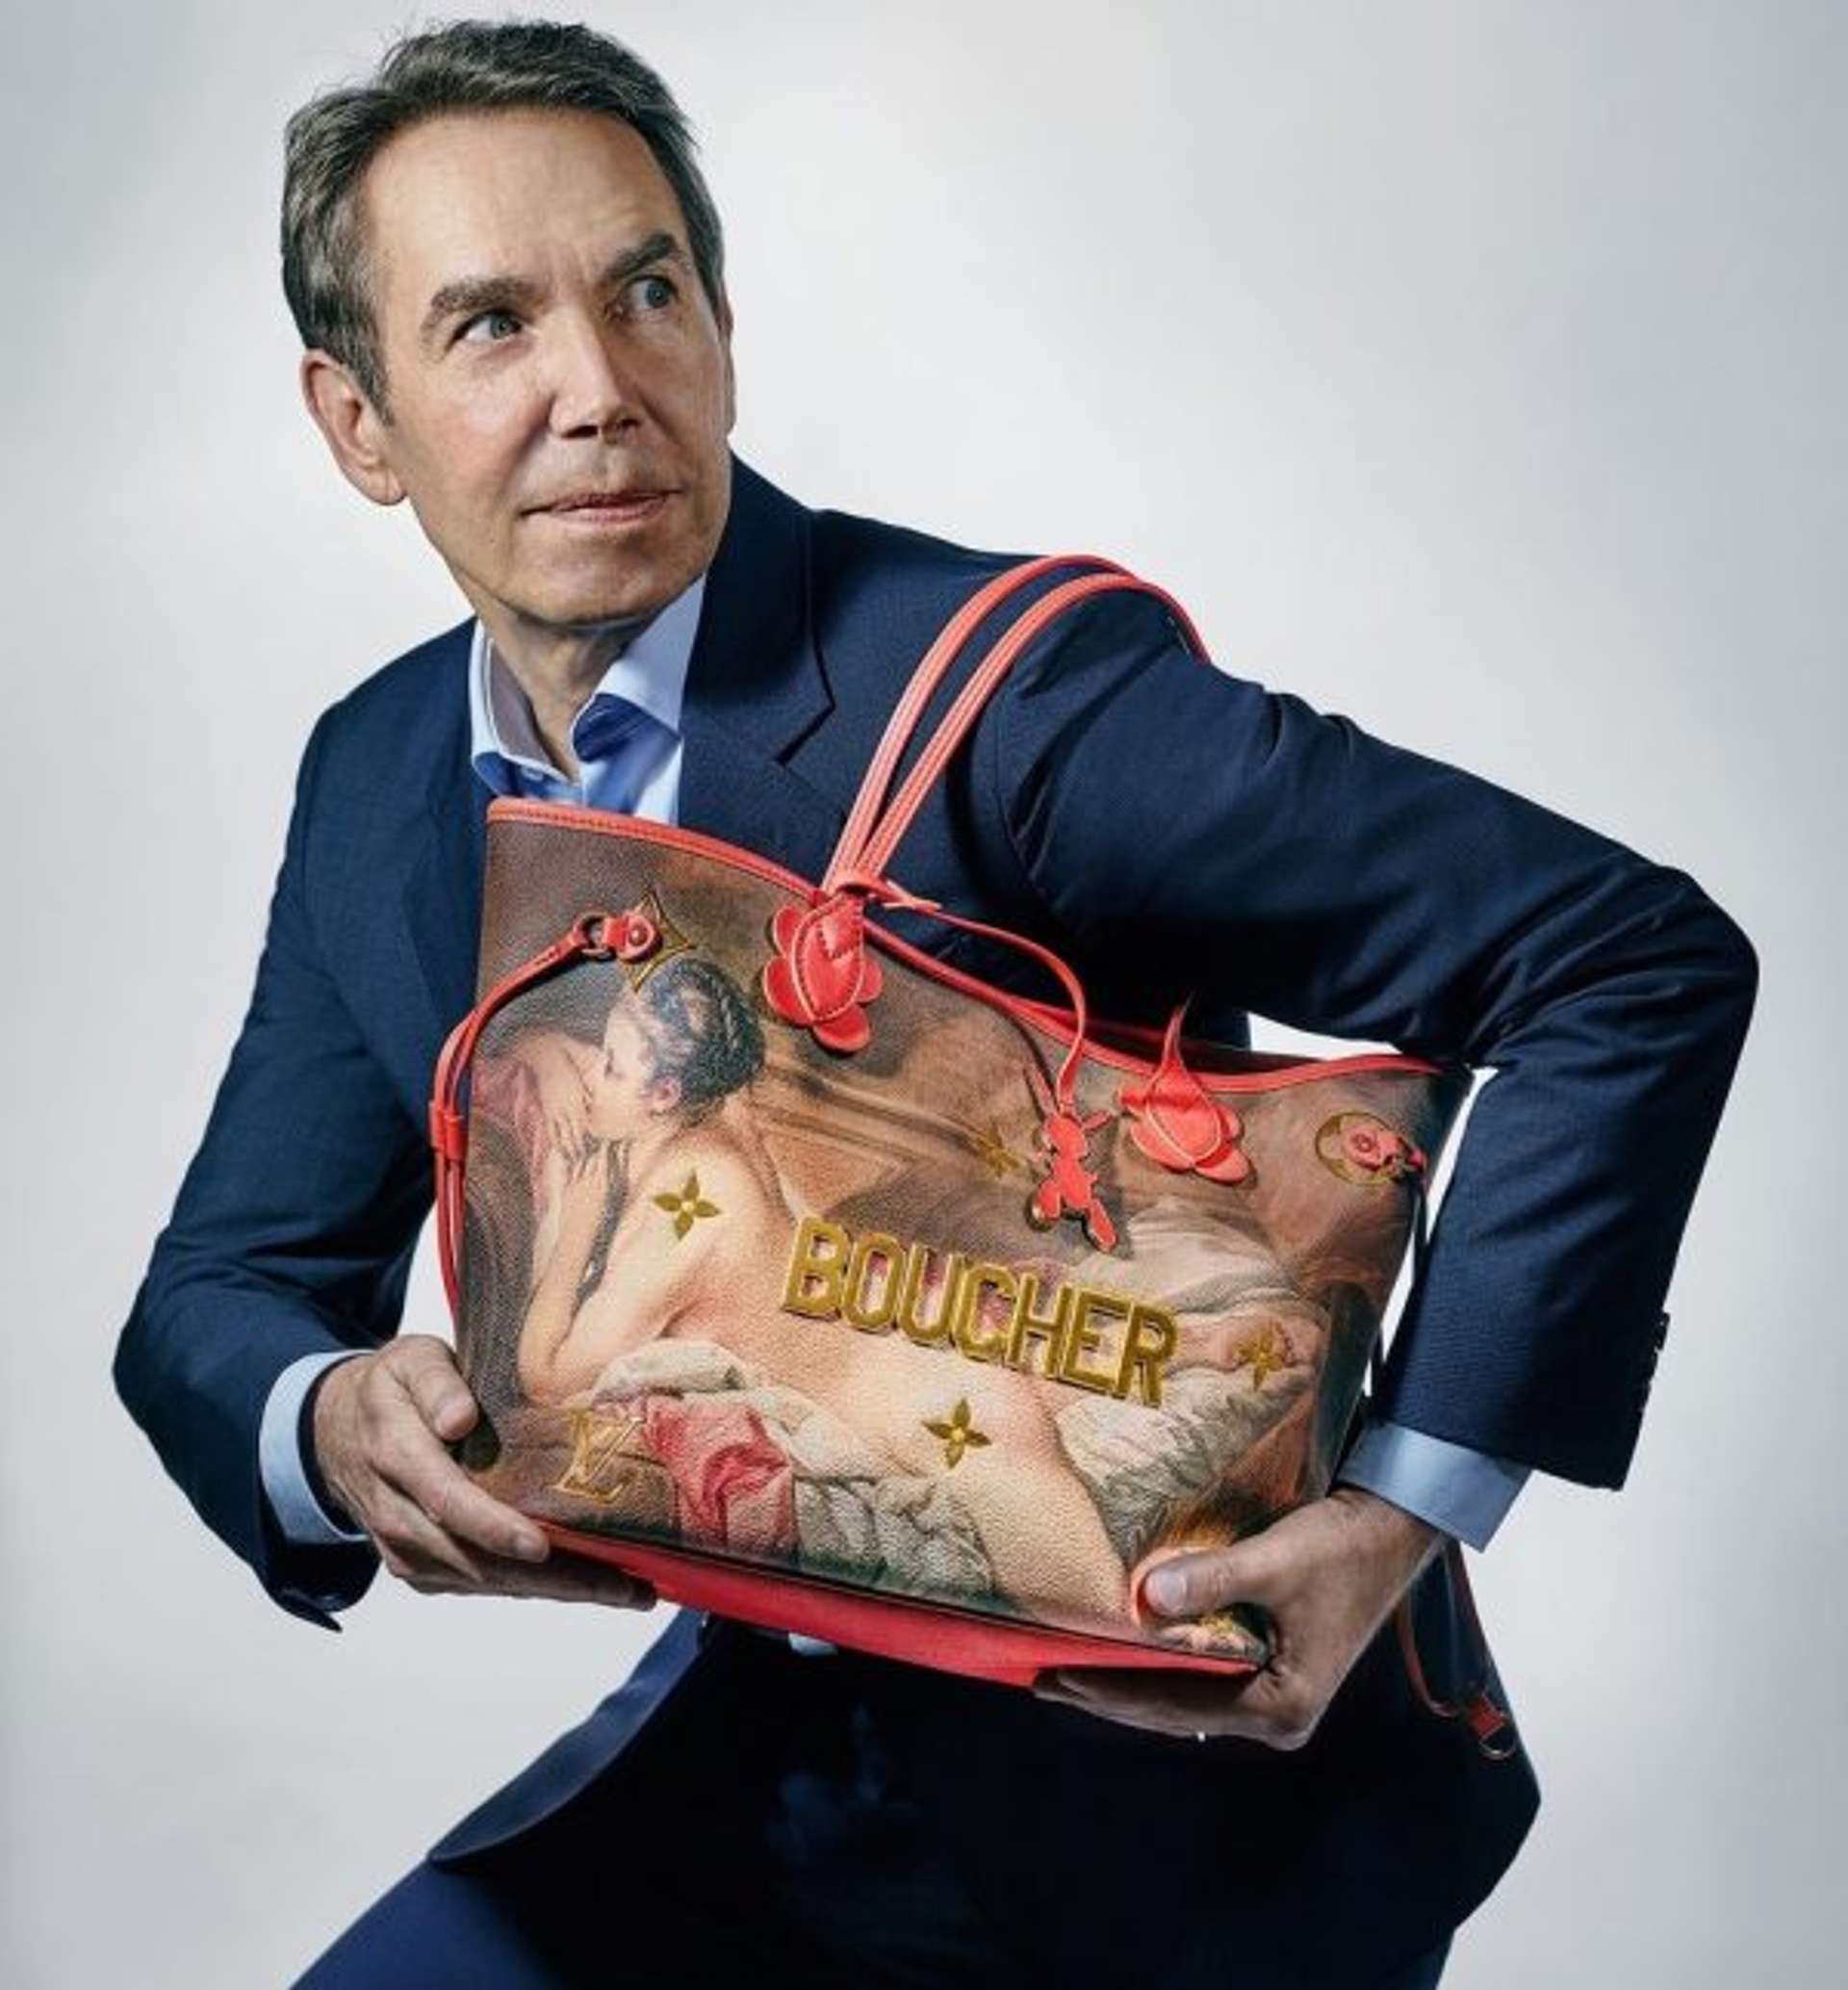 An image of artist Jeff Koons holding one of the bags he designed in collaboration with Louis Vuitton.]